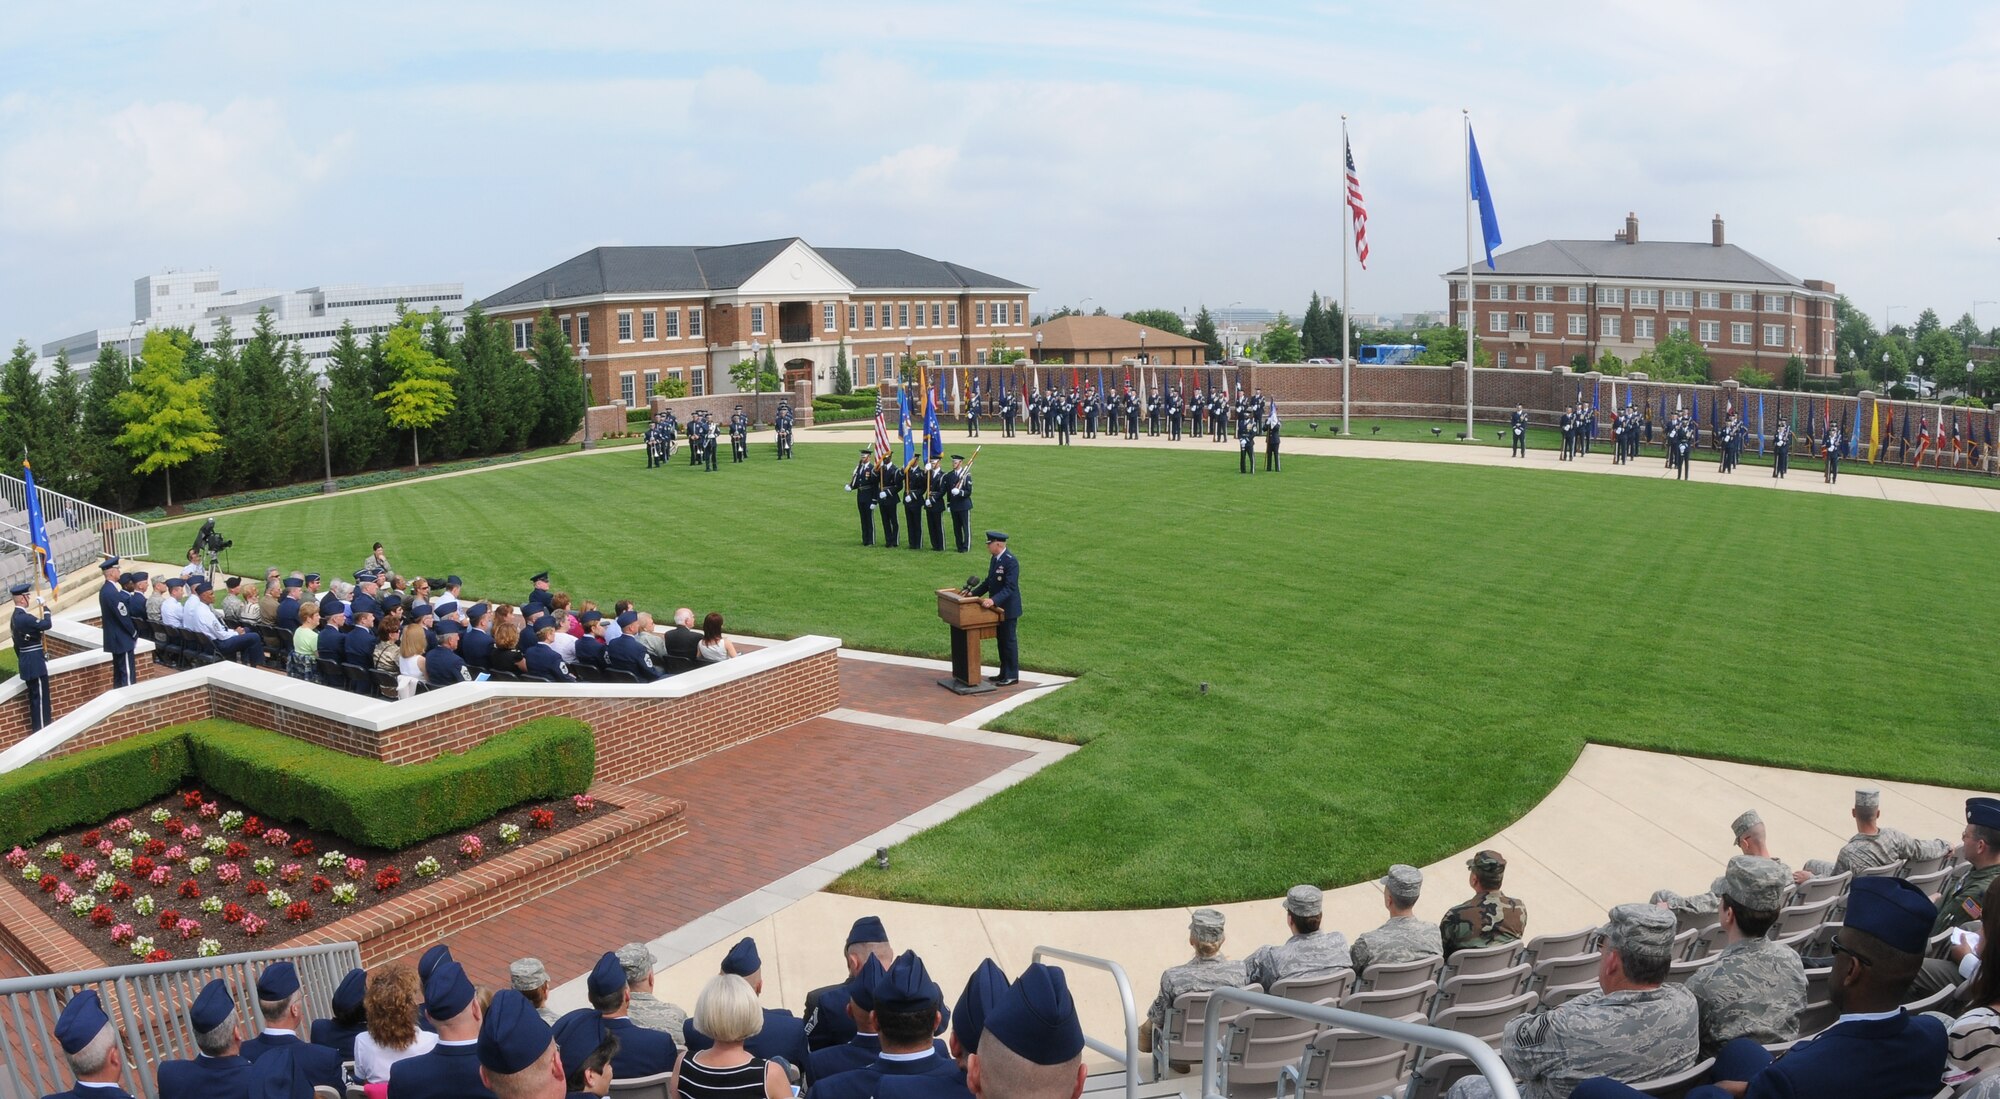 Lt. Gen. Harry M. Wyatt III, Air National Guard director, gives a few remarks before retiring Richard A. Smith, Air National Guard Command Chief Master Sgt., May 29 on the Bolling ceremonial lawn. Chief Smith served as the ninth command chief master sergeant for the Air National Guard after being selected by Lieutenant General Daniel James III in July 2004. (U.S Air Force photo by Senior Airman Alexandre Montes)